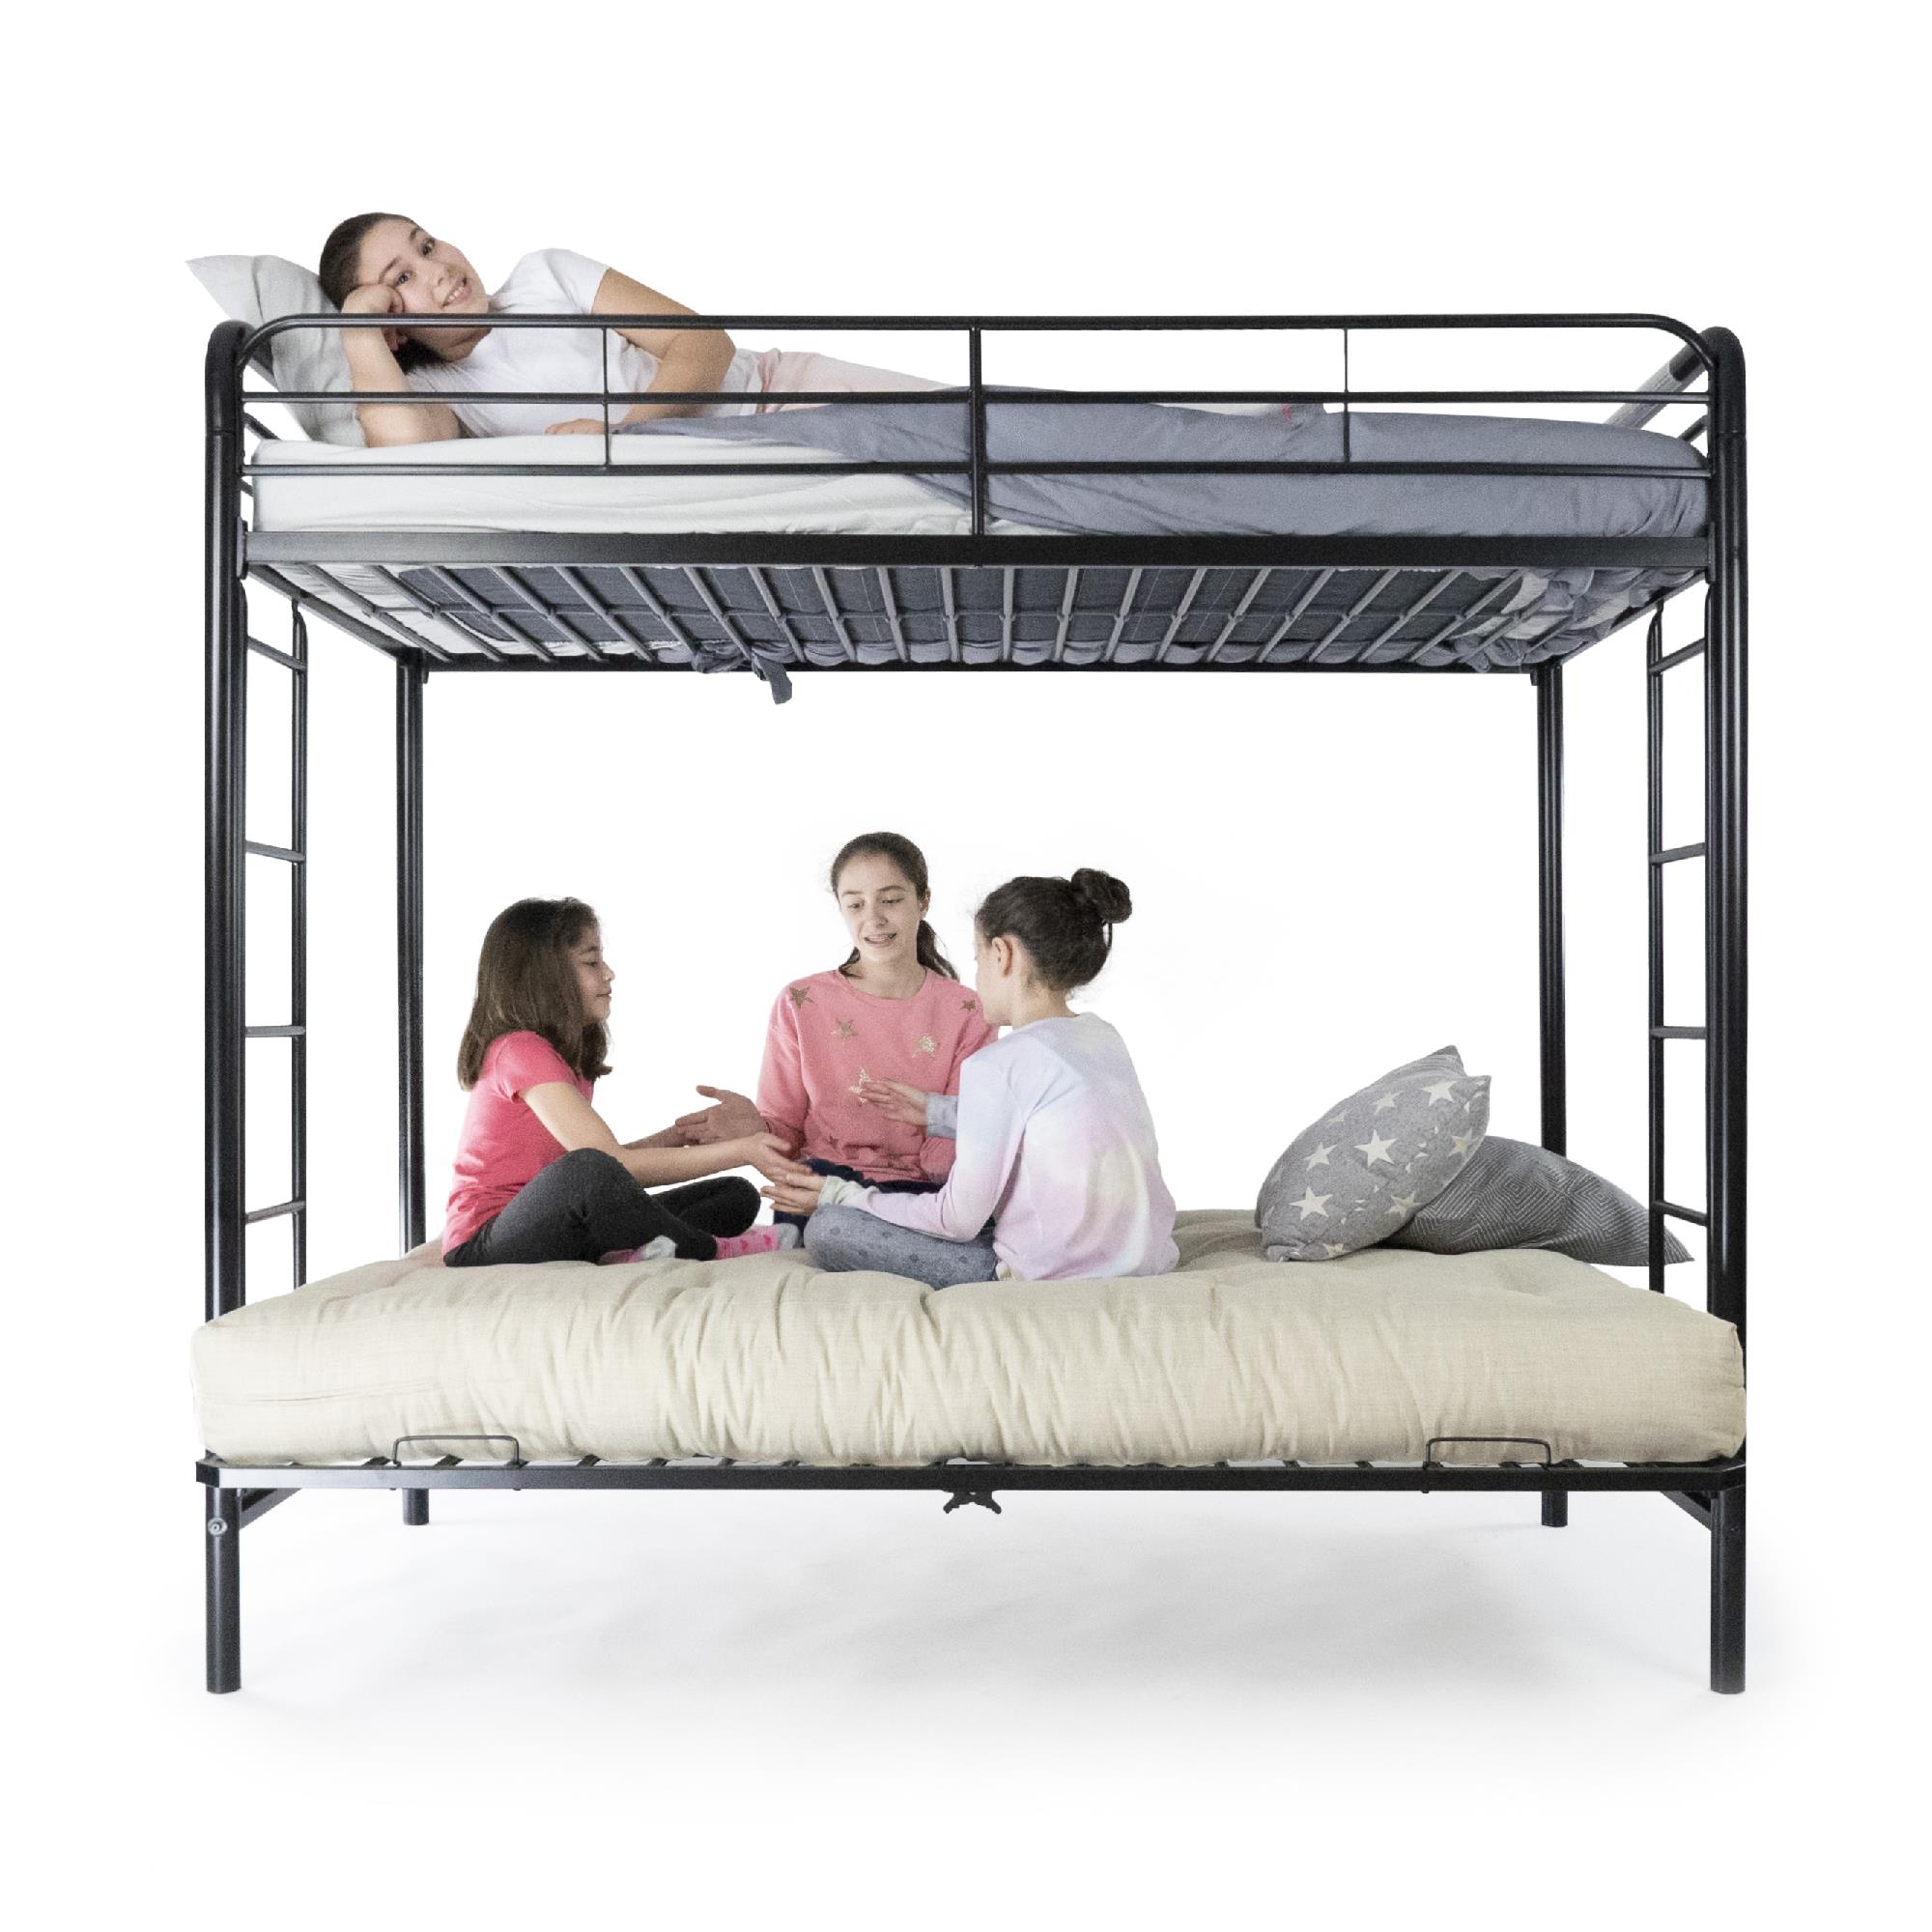 DHP Sammie Twin over Futon Metal Bunk Bed, Black - image 5 of 14